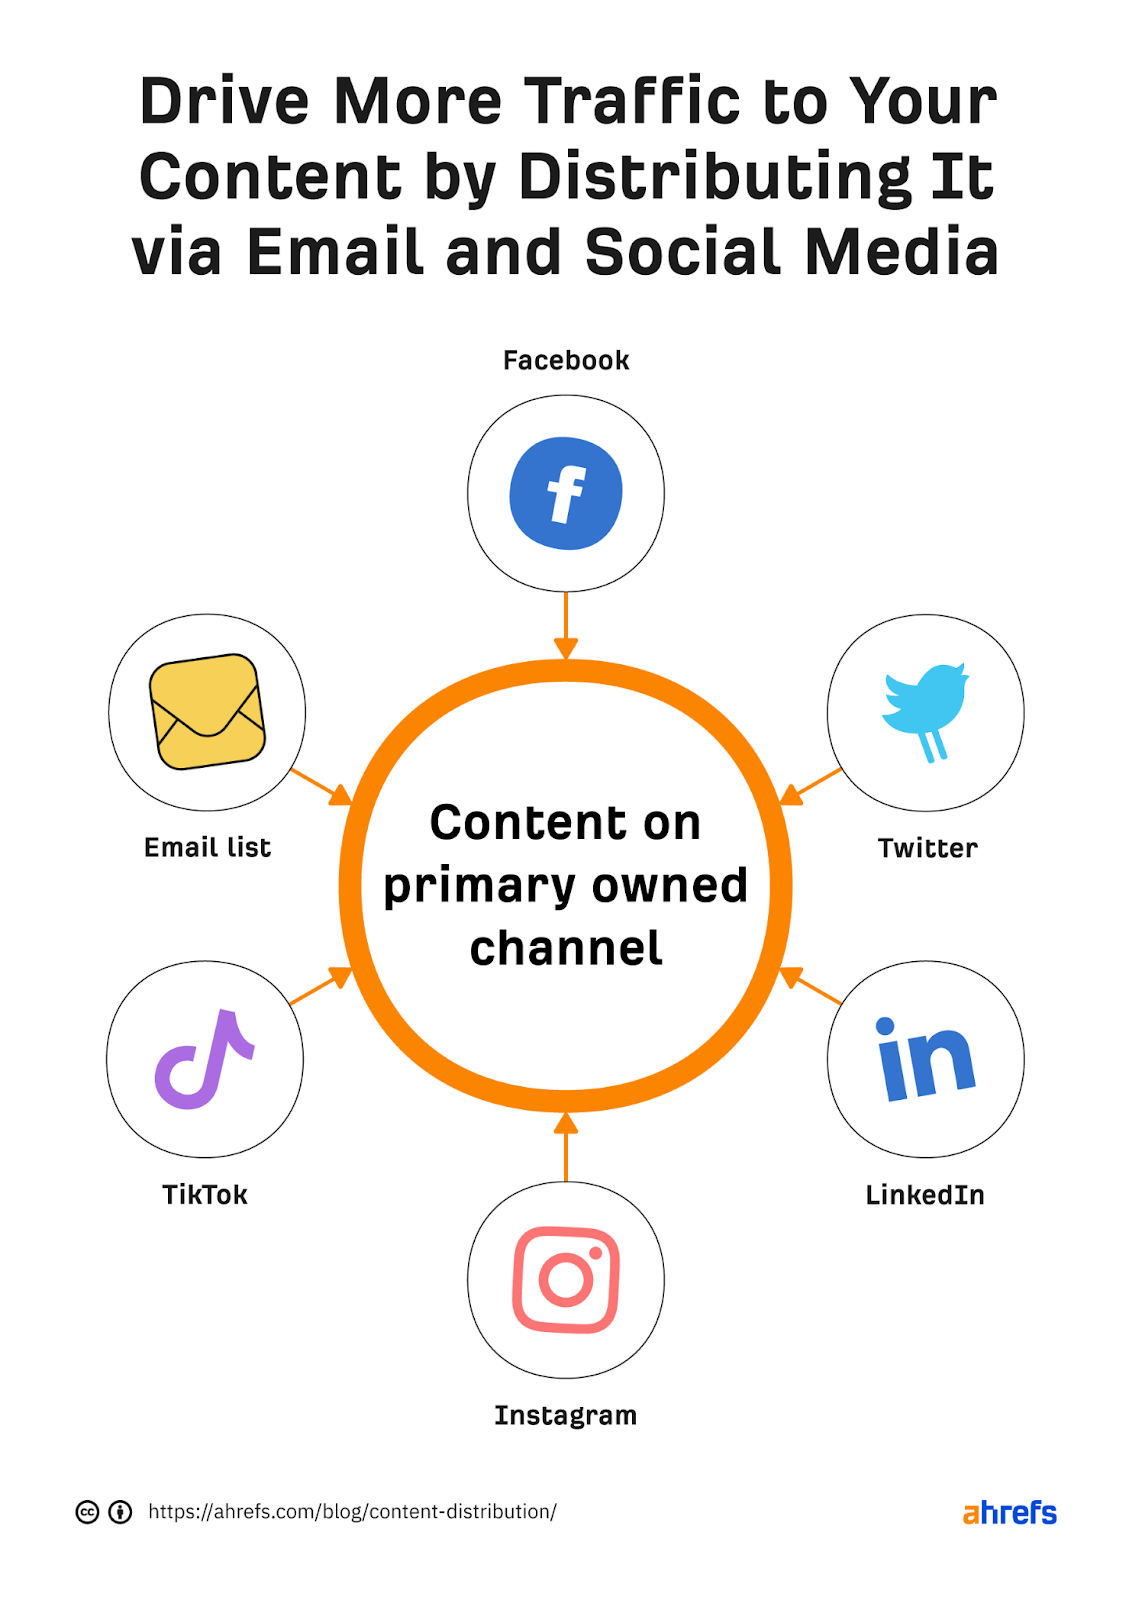 Flow chart showing various symbols of social media sites pointing to a center section "Content on primary owned channel" 